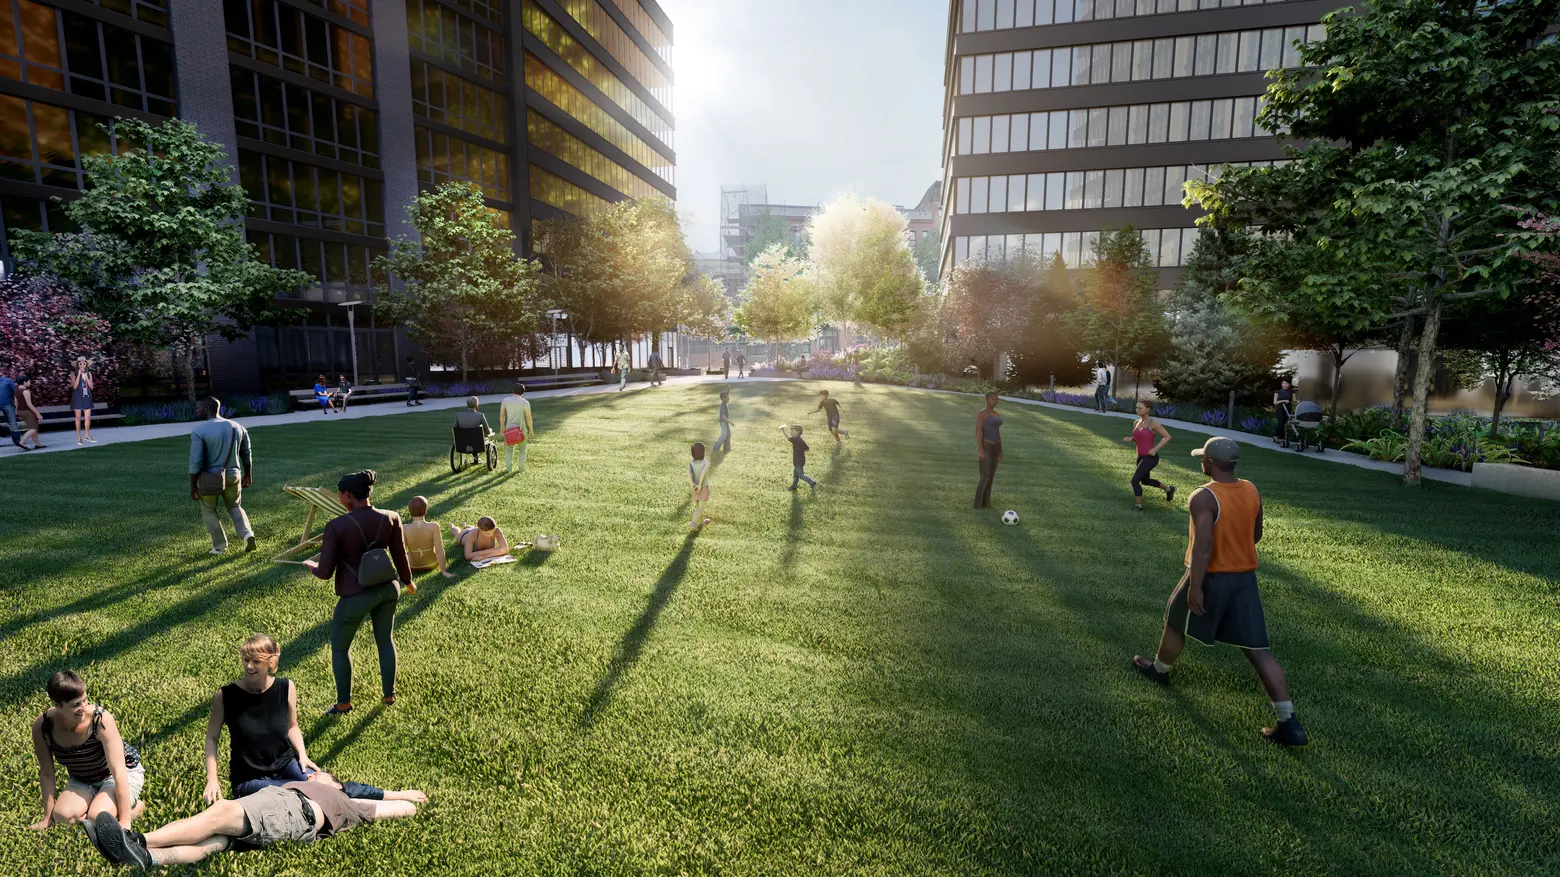 New renderings show 72,600-square-foot public park coming to Brooklyn’s Pacific Park development